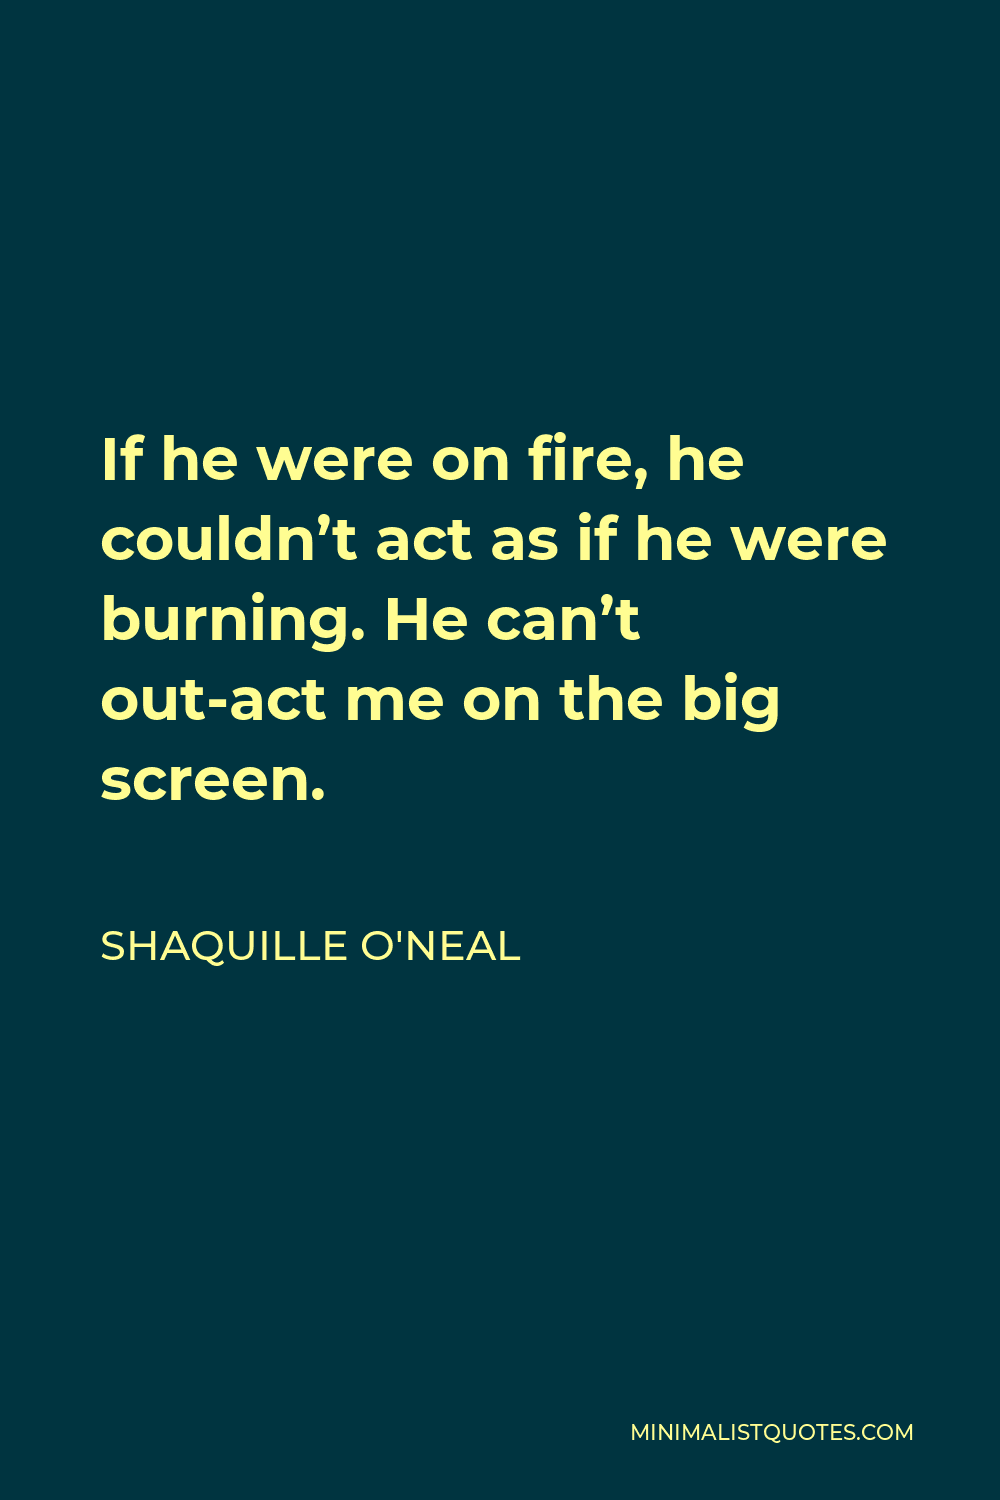 Shaquille O'Neal Quote - If he were on fire, he couldn’t act as if he were burning. He can’t out-act me on the big screen.